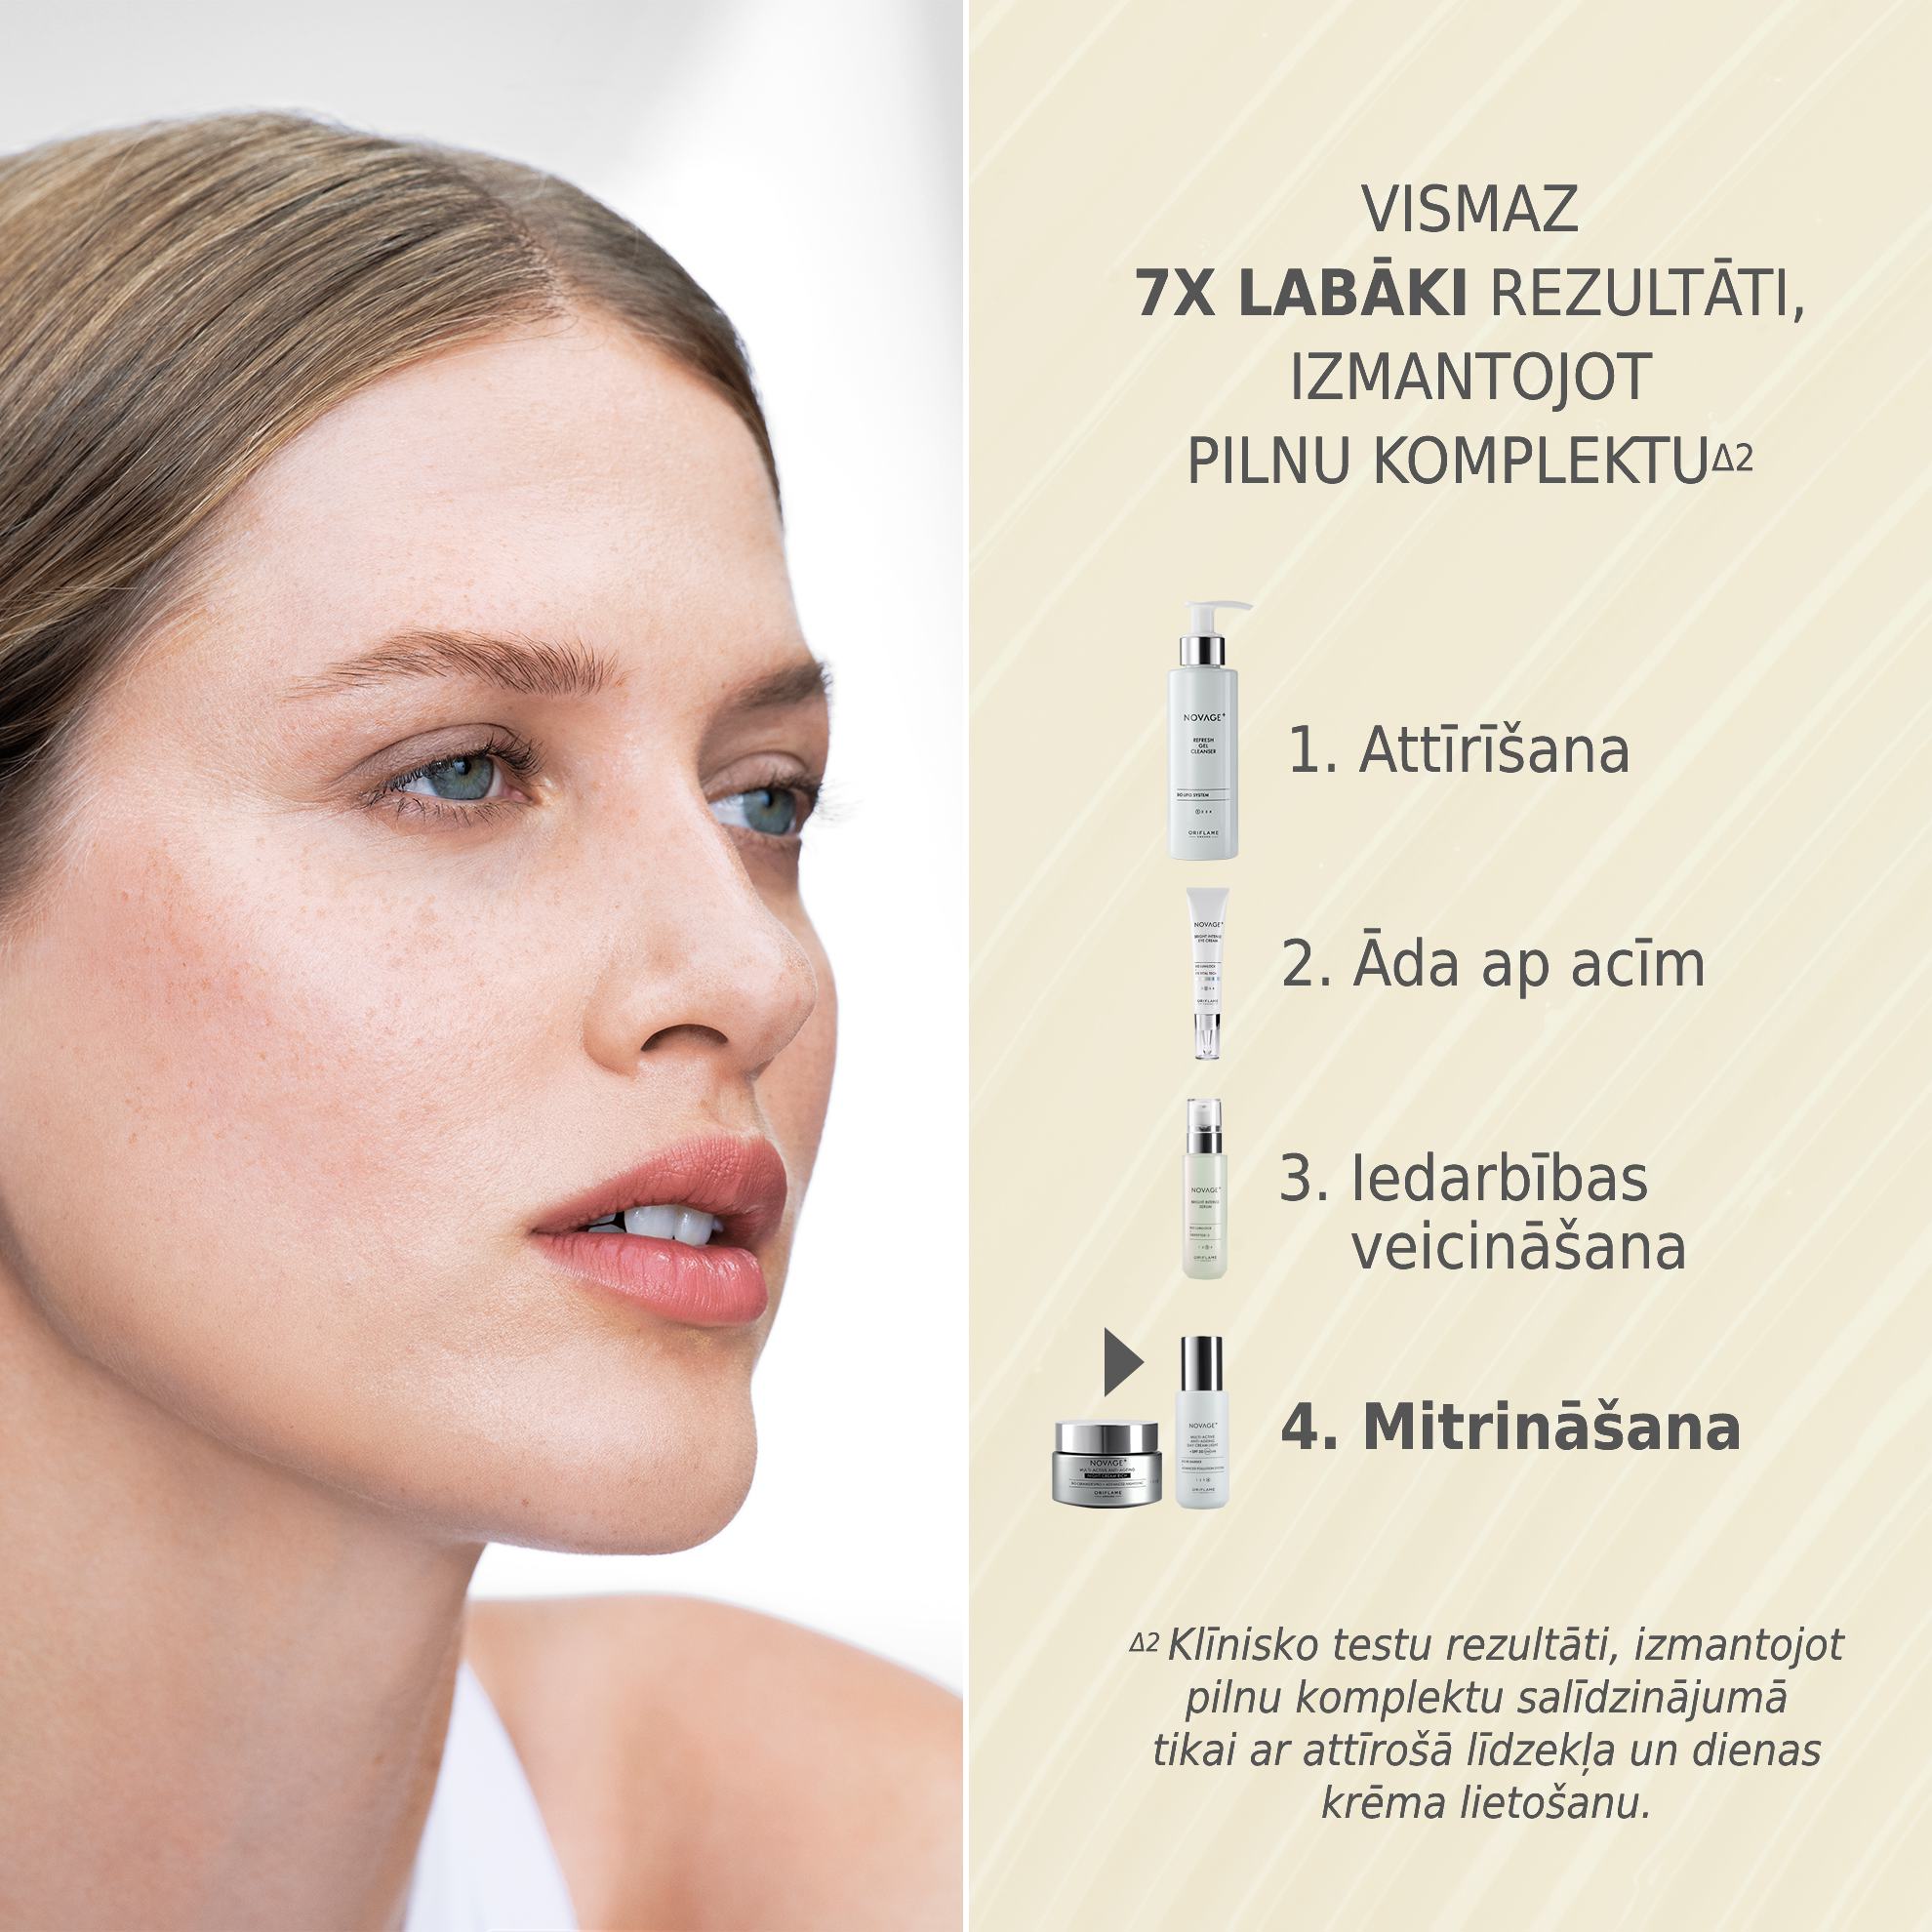 https://media-cdn.oriflame.com/productImage?externalMediaId=product-management-media%2fProducts%2f41044%2fLV%2f41044_4.png&id=17606370&version=2